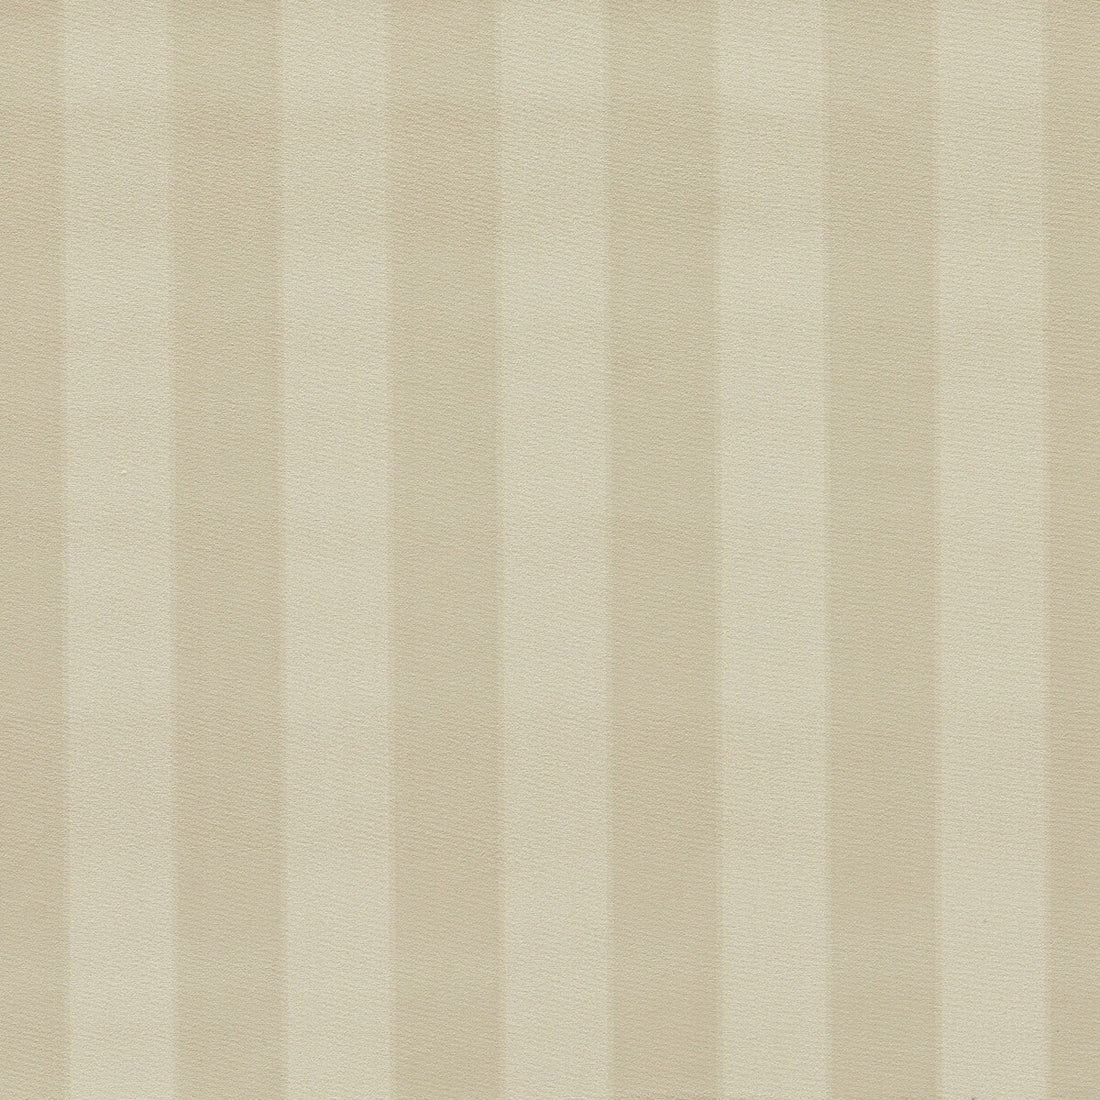 Haldon fabric in antique color - pattern F1690/01.CAC.0 - by Clarke And Clarke in the Whitworth collection